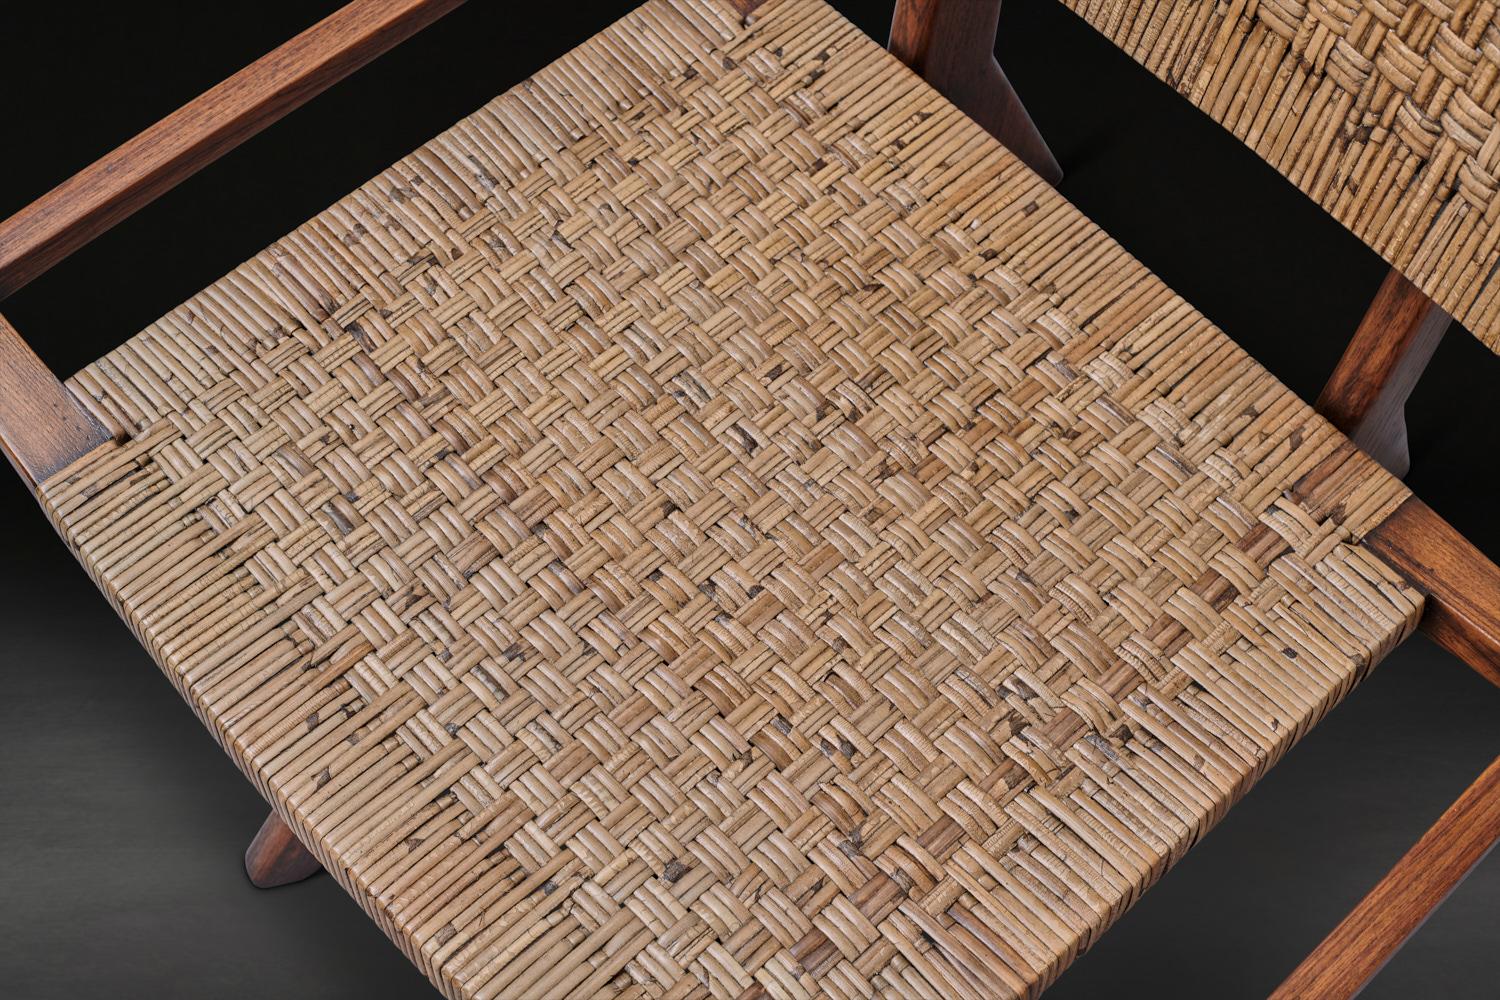 Wicker Mid Century Rattan Lounge chairs attr. to Paul László for Glenn of California